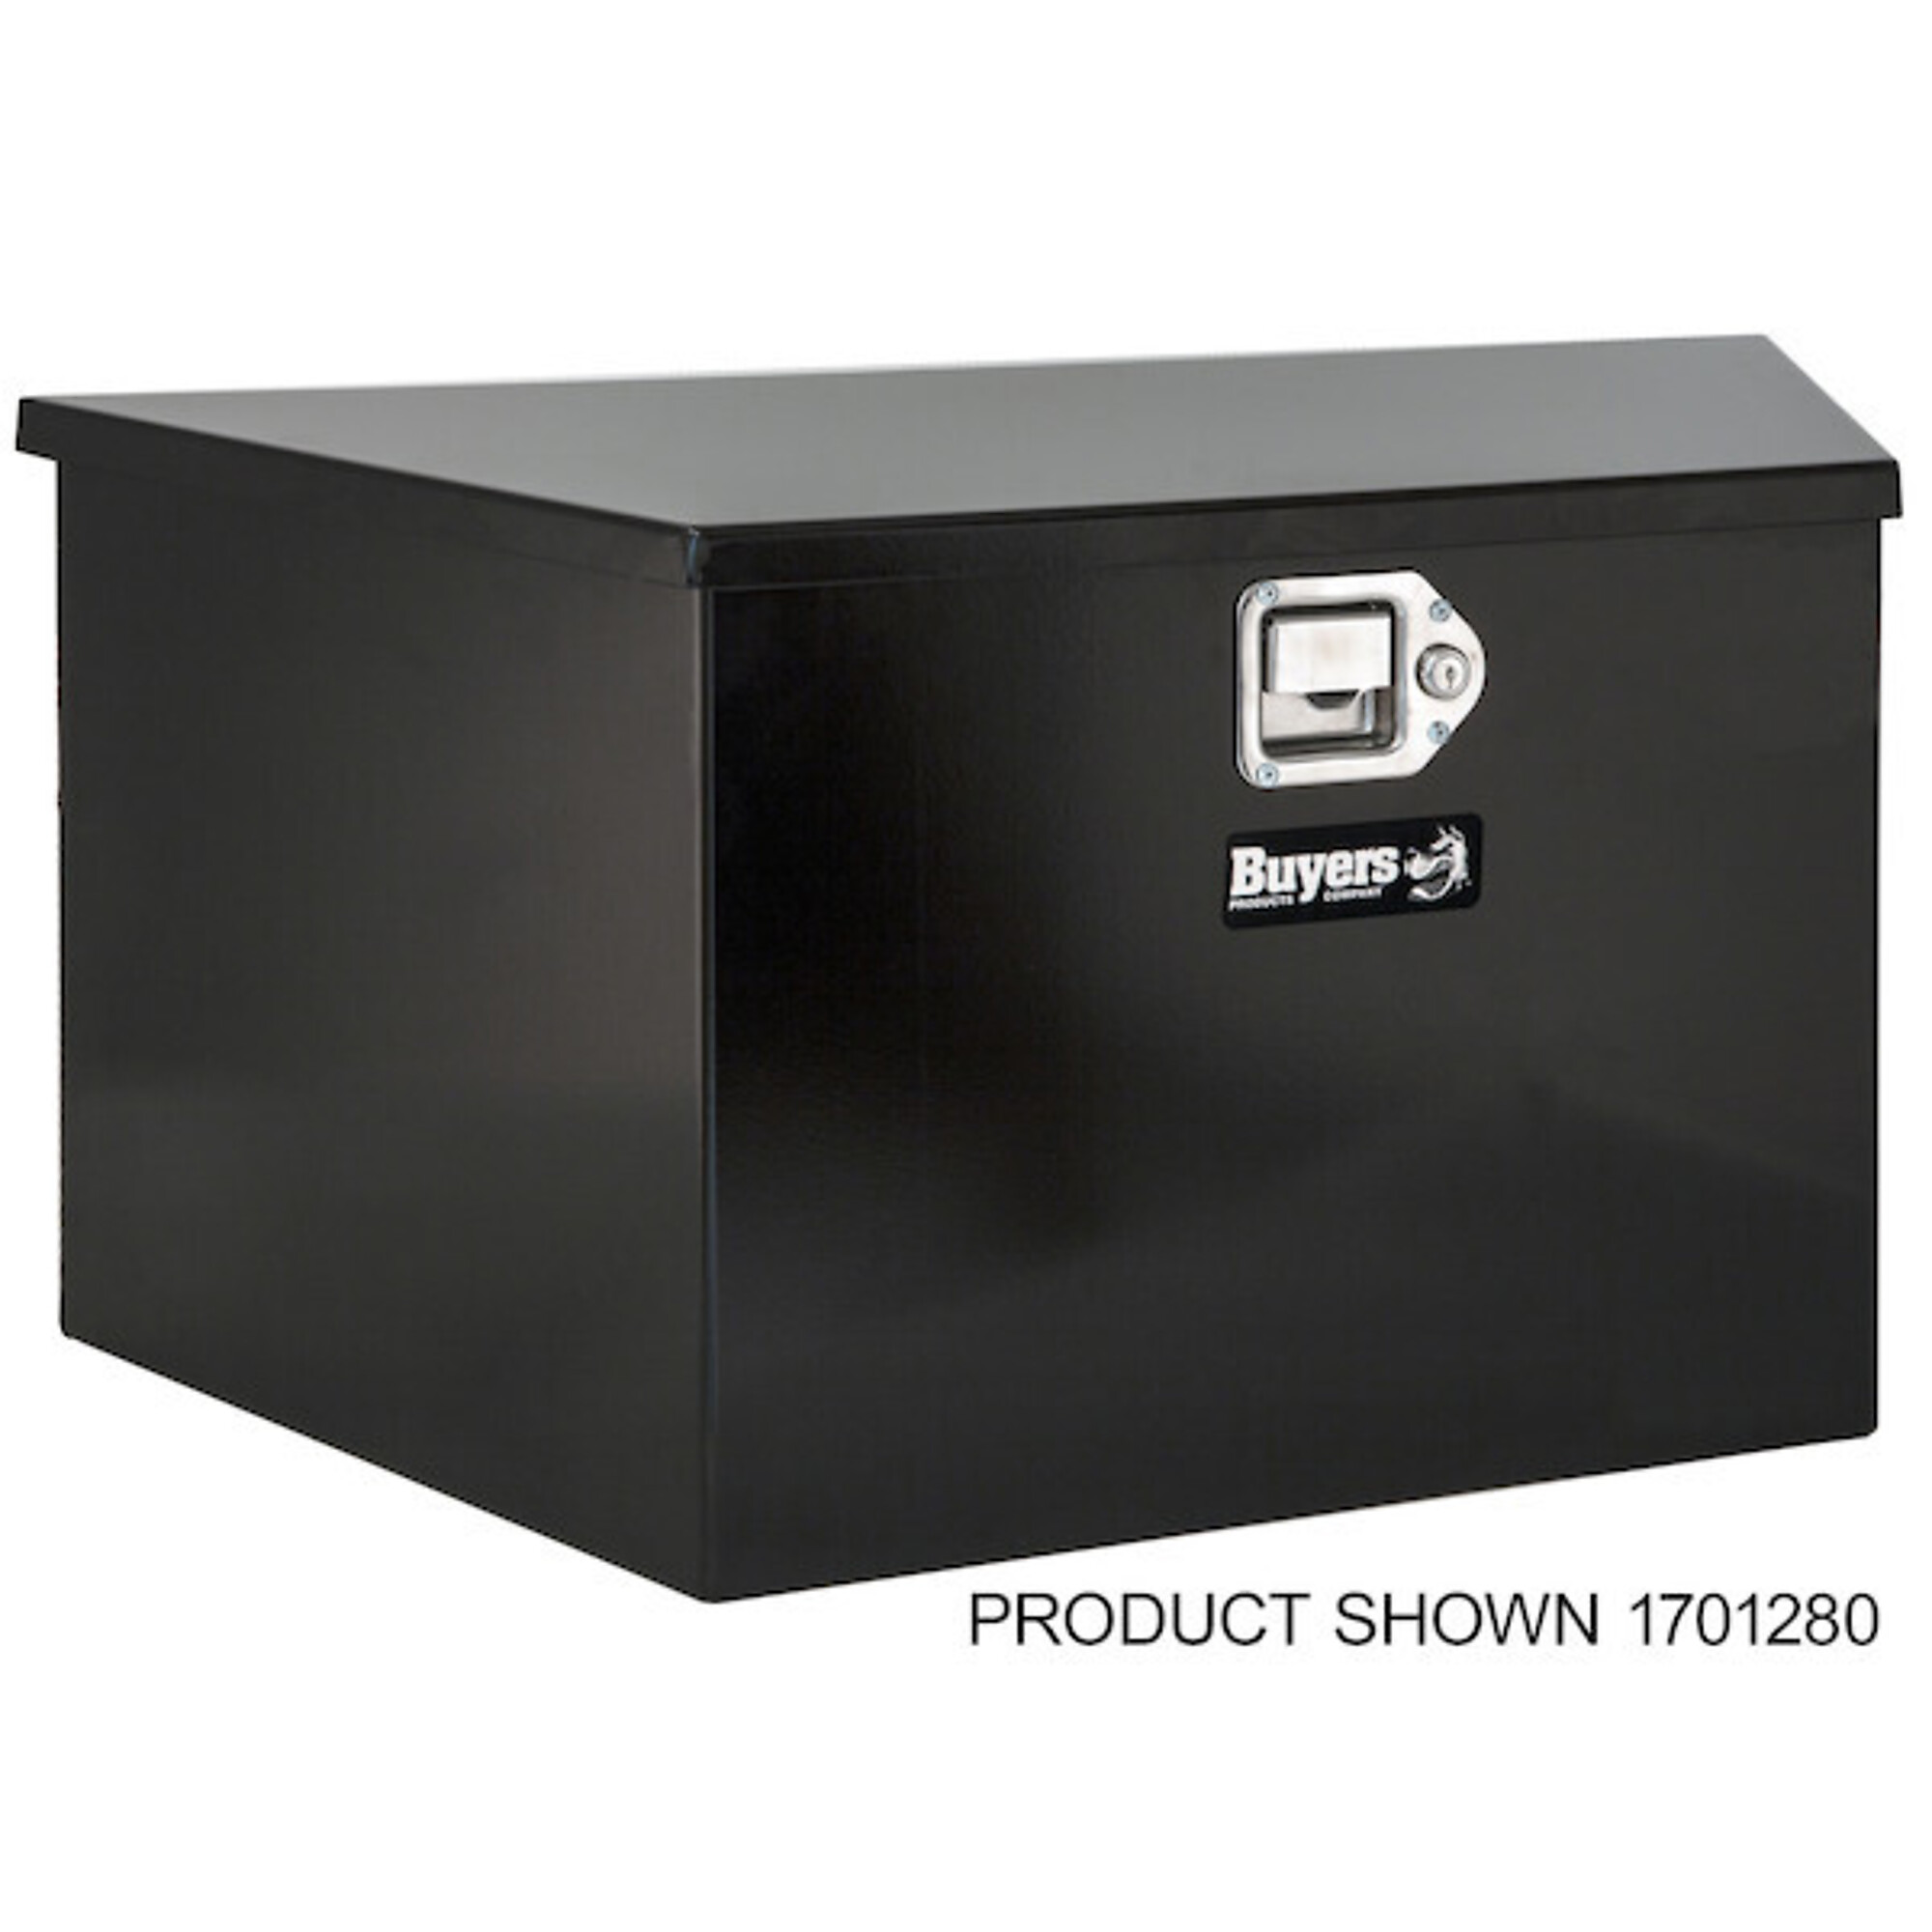 Buyers Products, Trailer Tongue Box, Width 35.5 in, Material Carbon Steel, Color Finish Glossy Black, Model 1701280